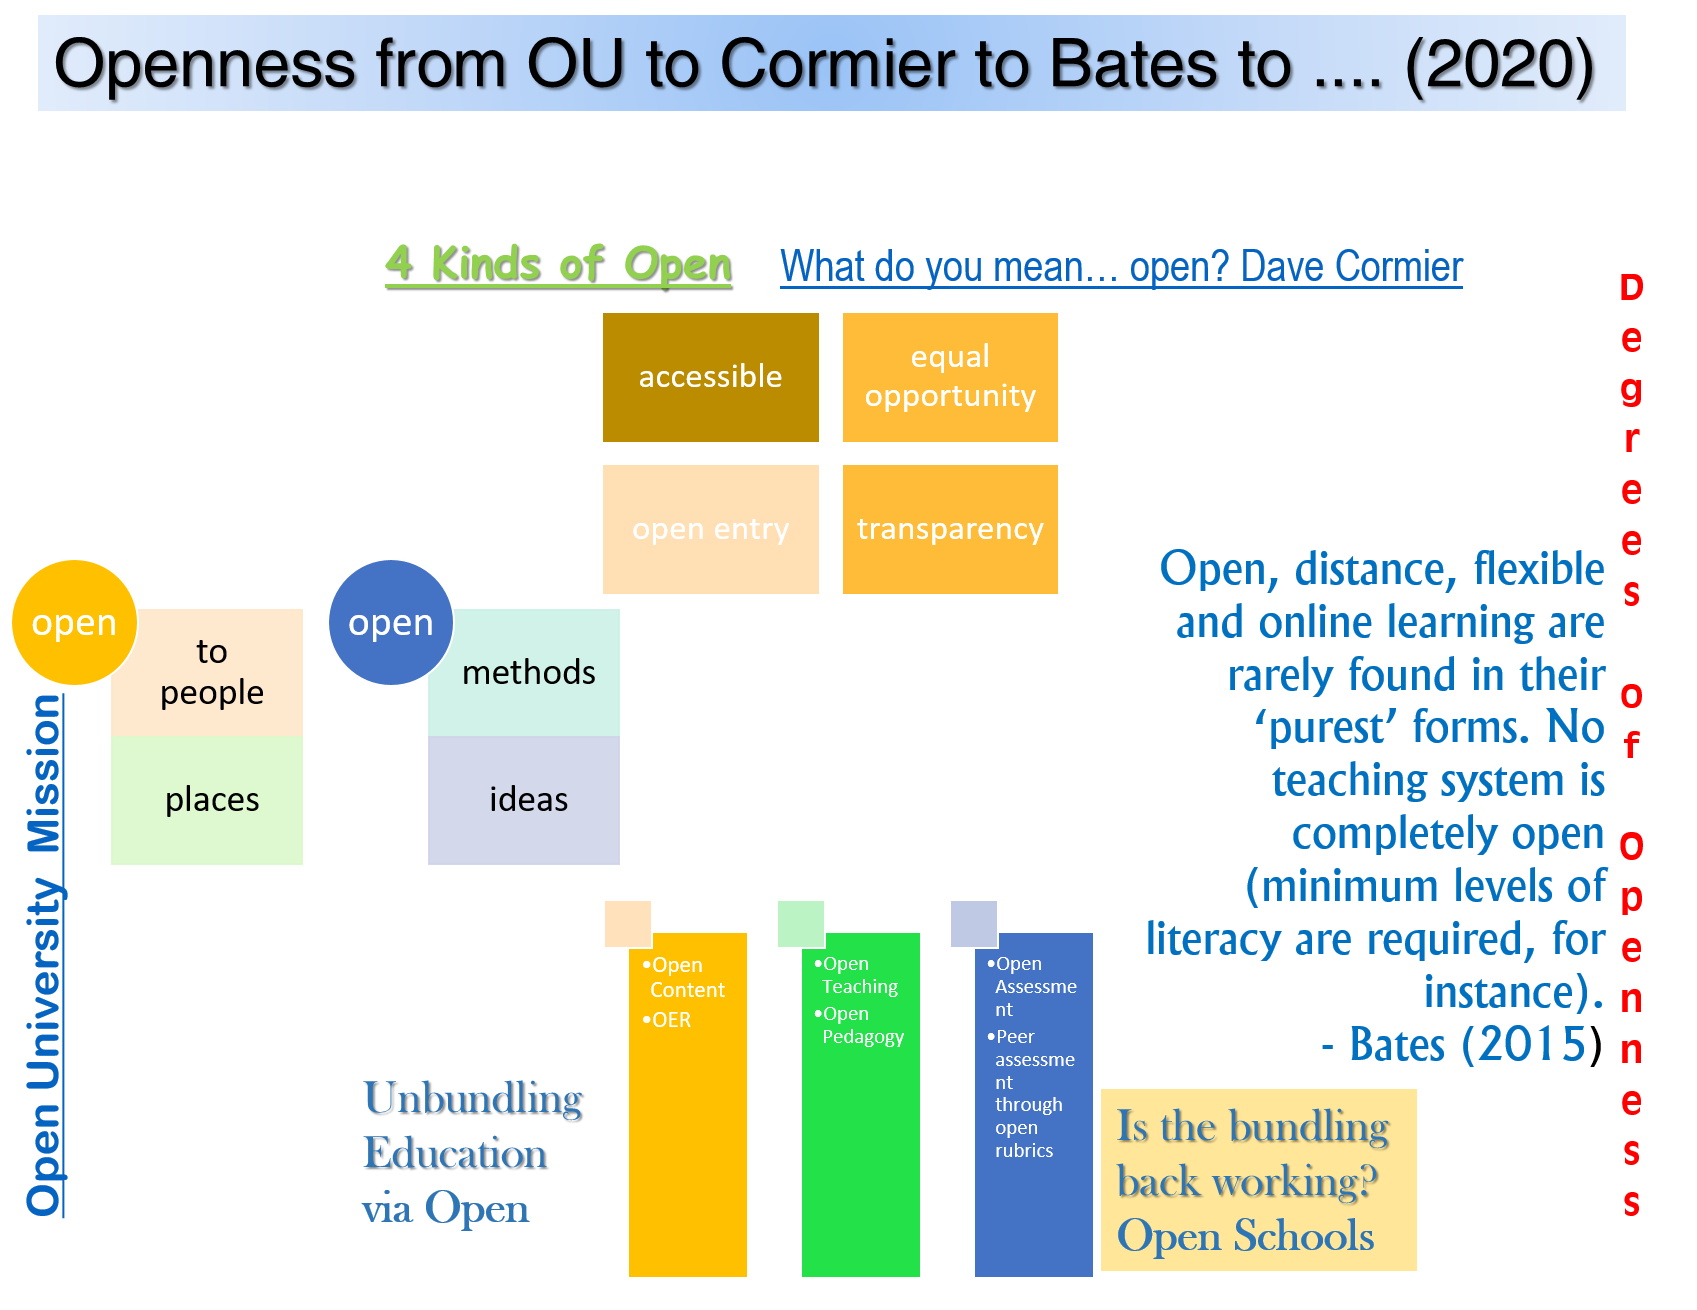 Openness from OU to Cormier to Bates...